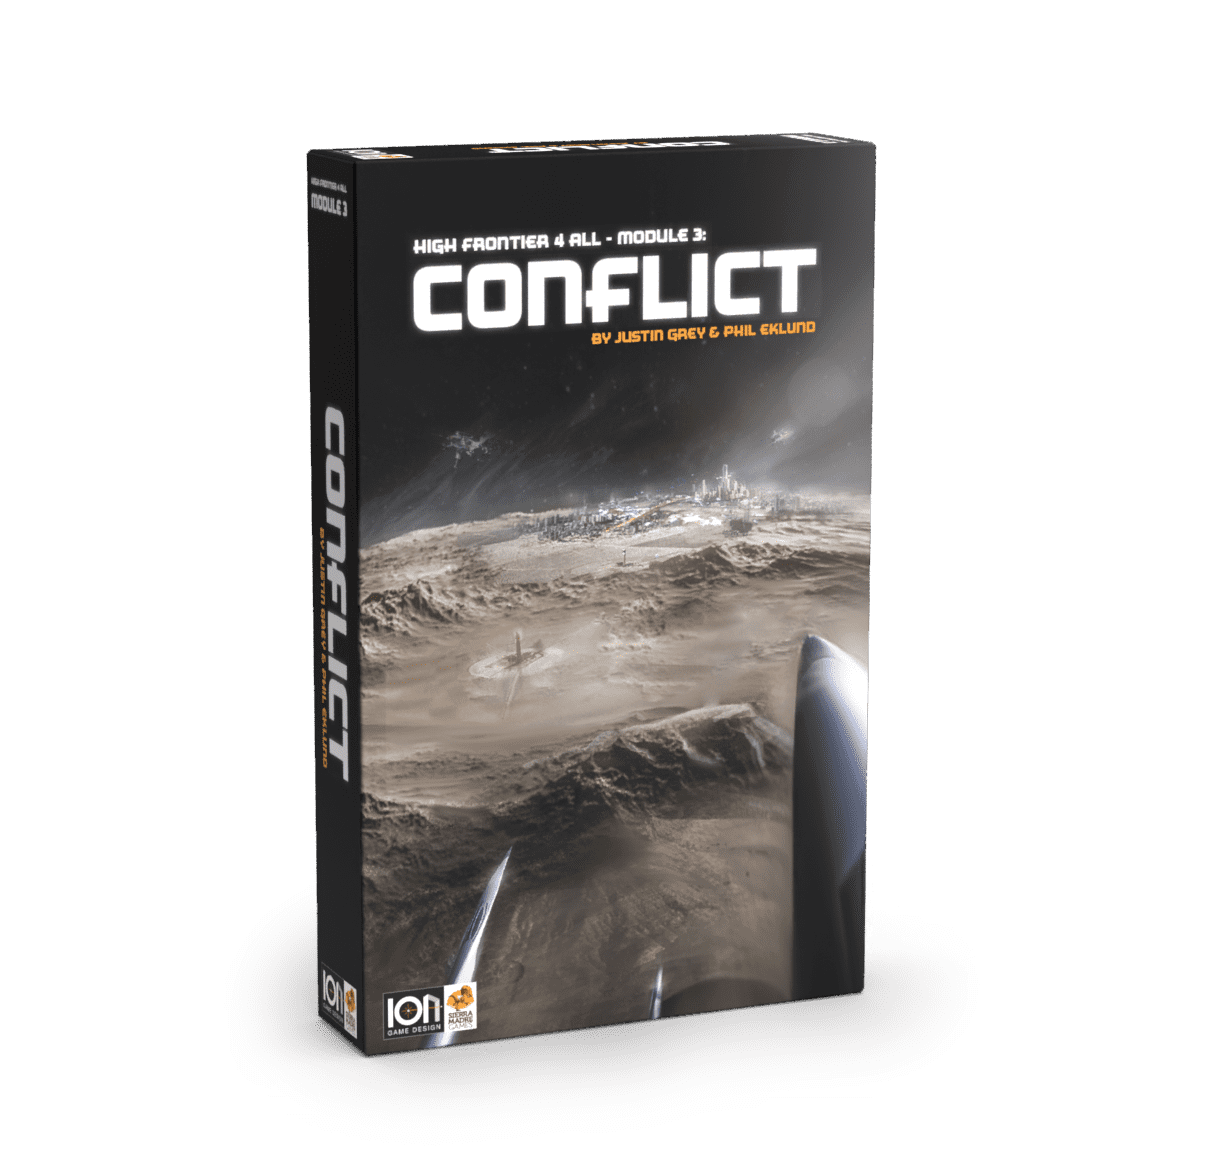 HF4 Module 3: Conflict Board Game - 3D front box cover